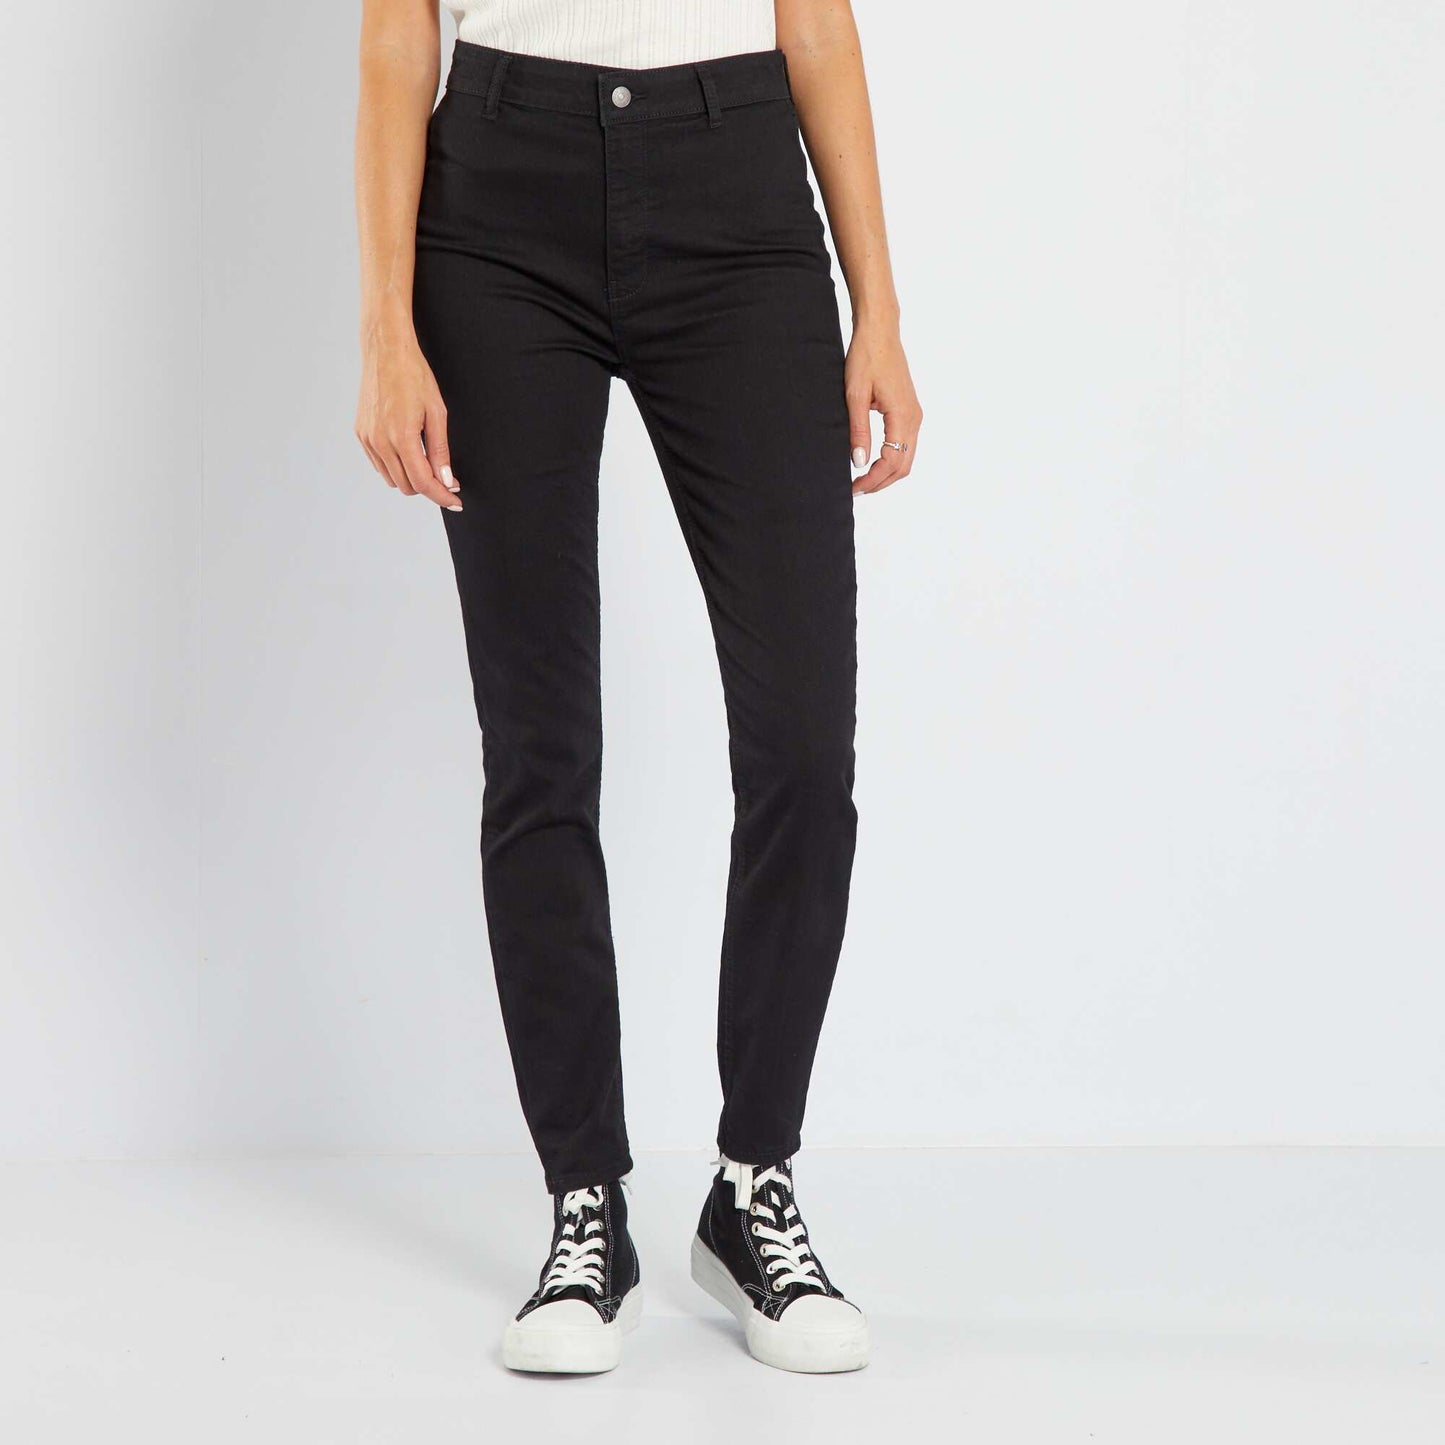 Skinny jeans/very fitted cut Black